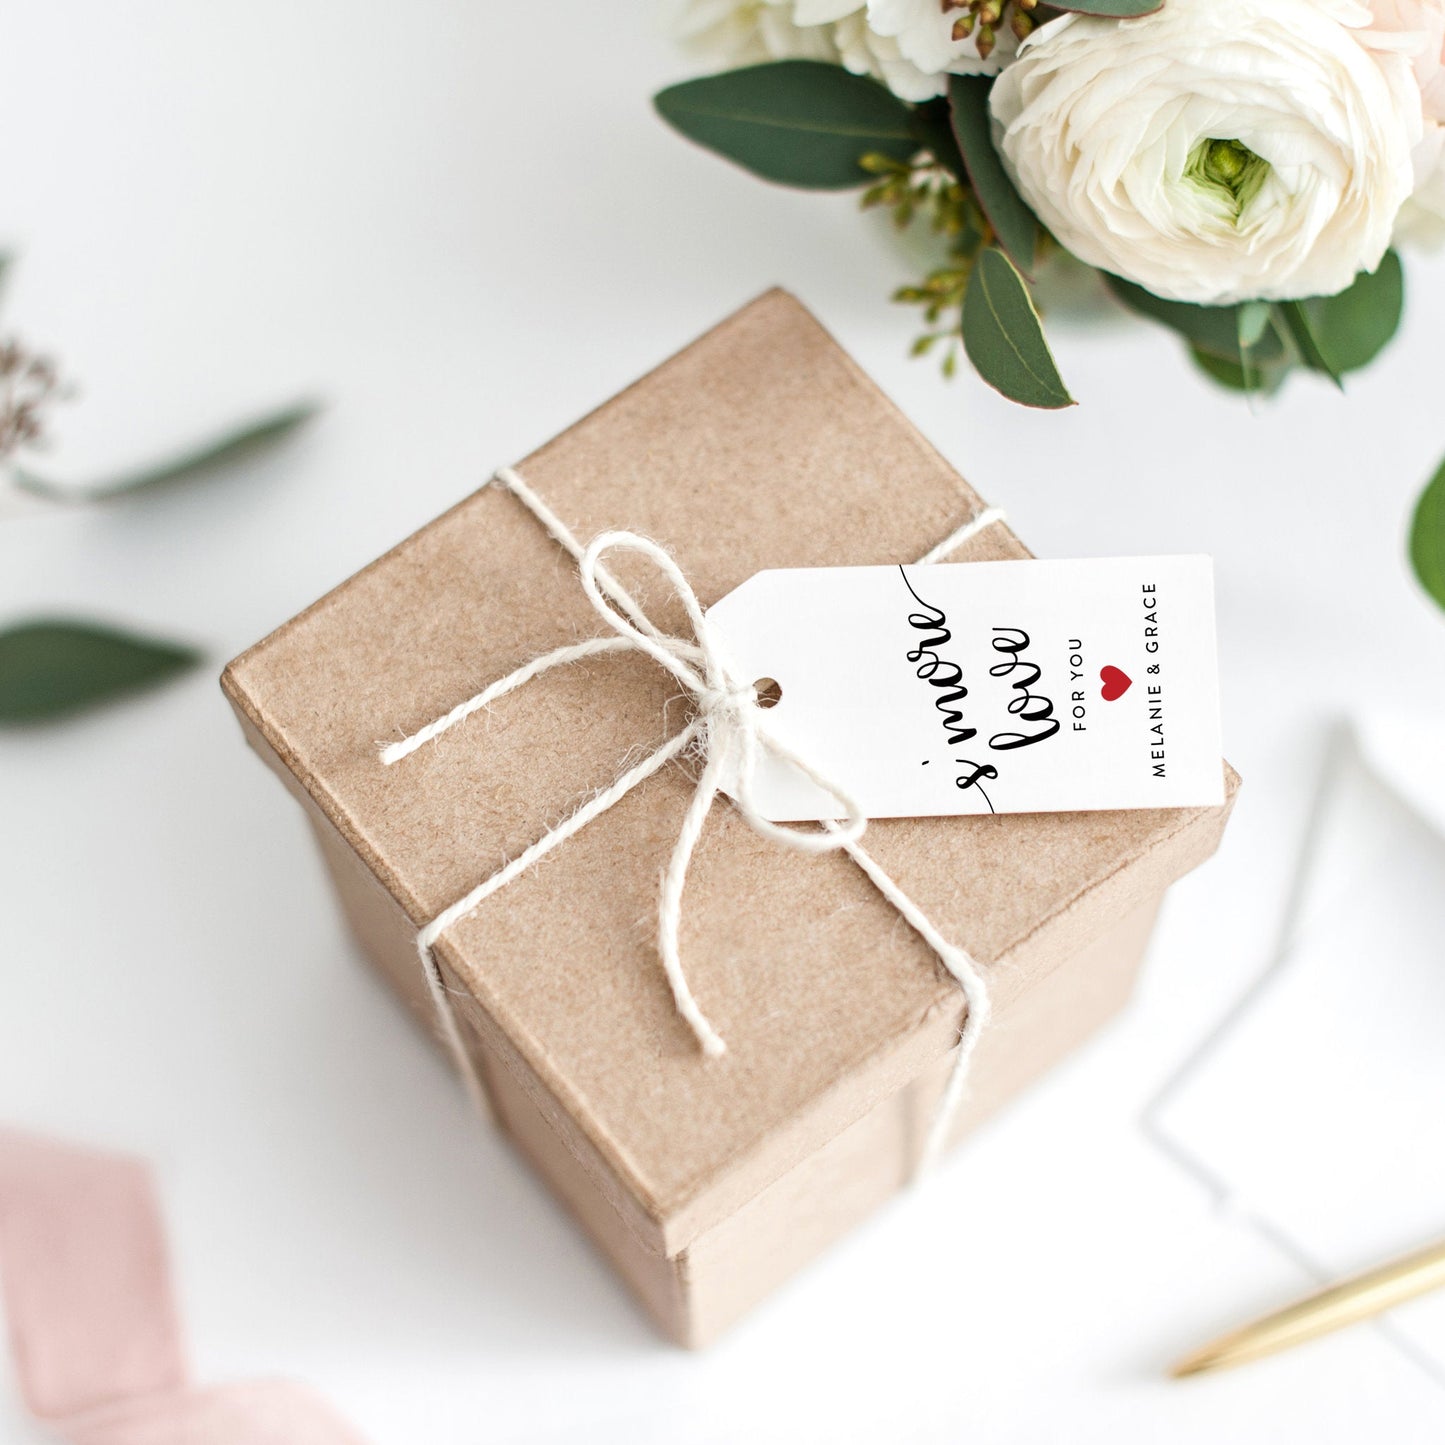 Lux Party’s white s’more love wedding favor tag with black script and a red heart, tied to a brown kraft favor box.